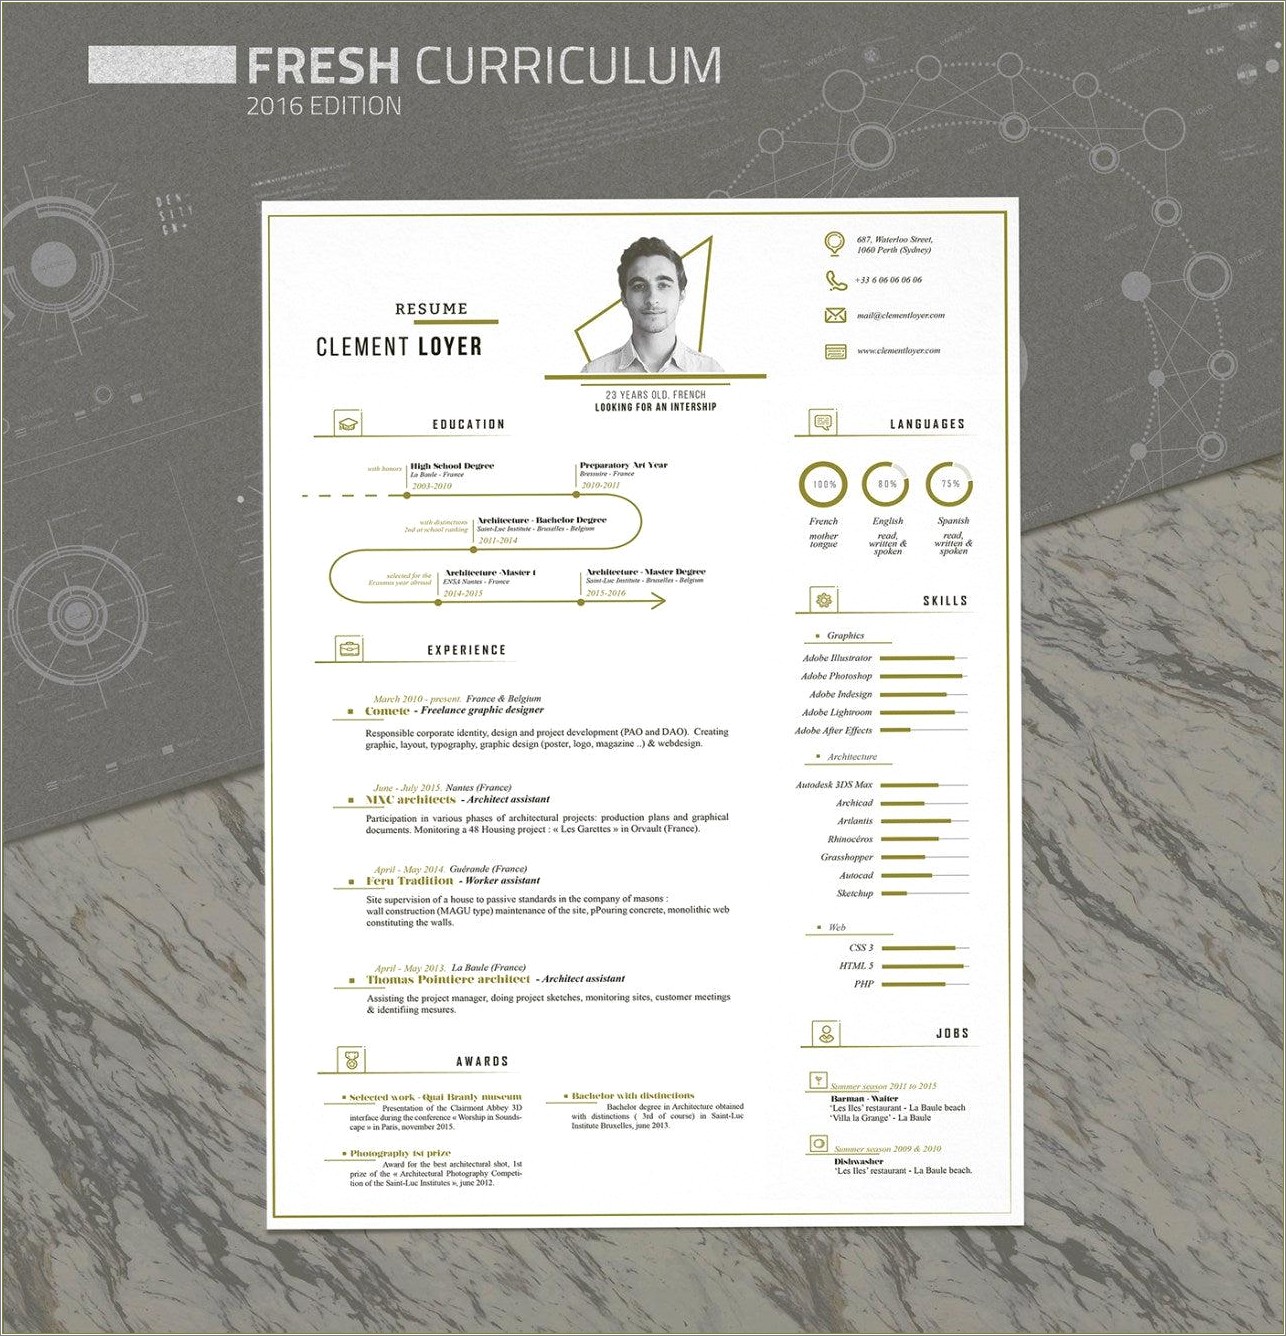 Resume Curriculum Vitae Cv After Effects Template Free